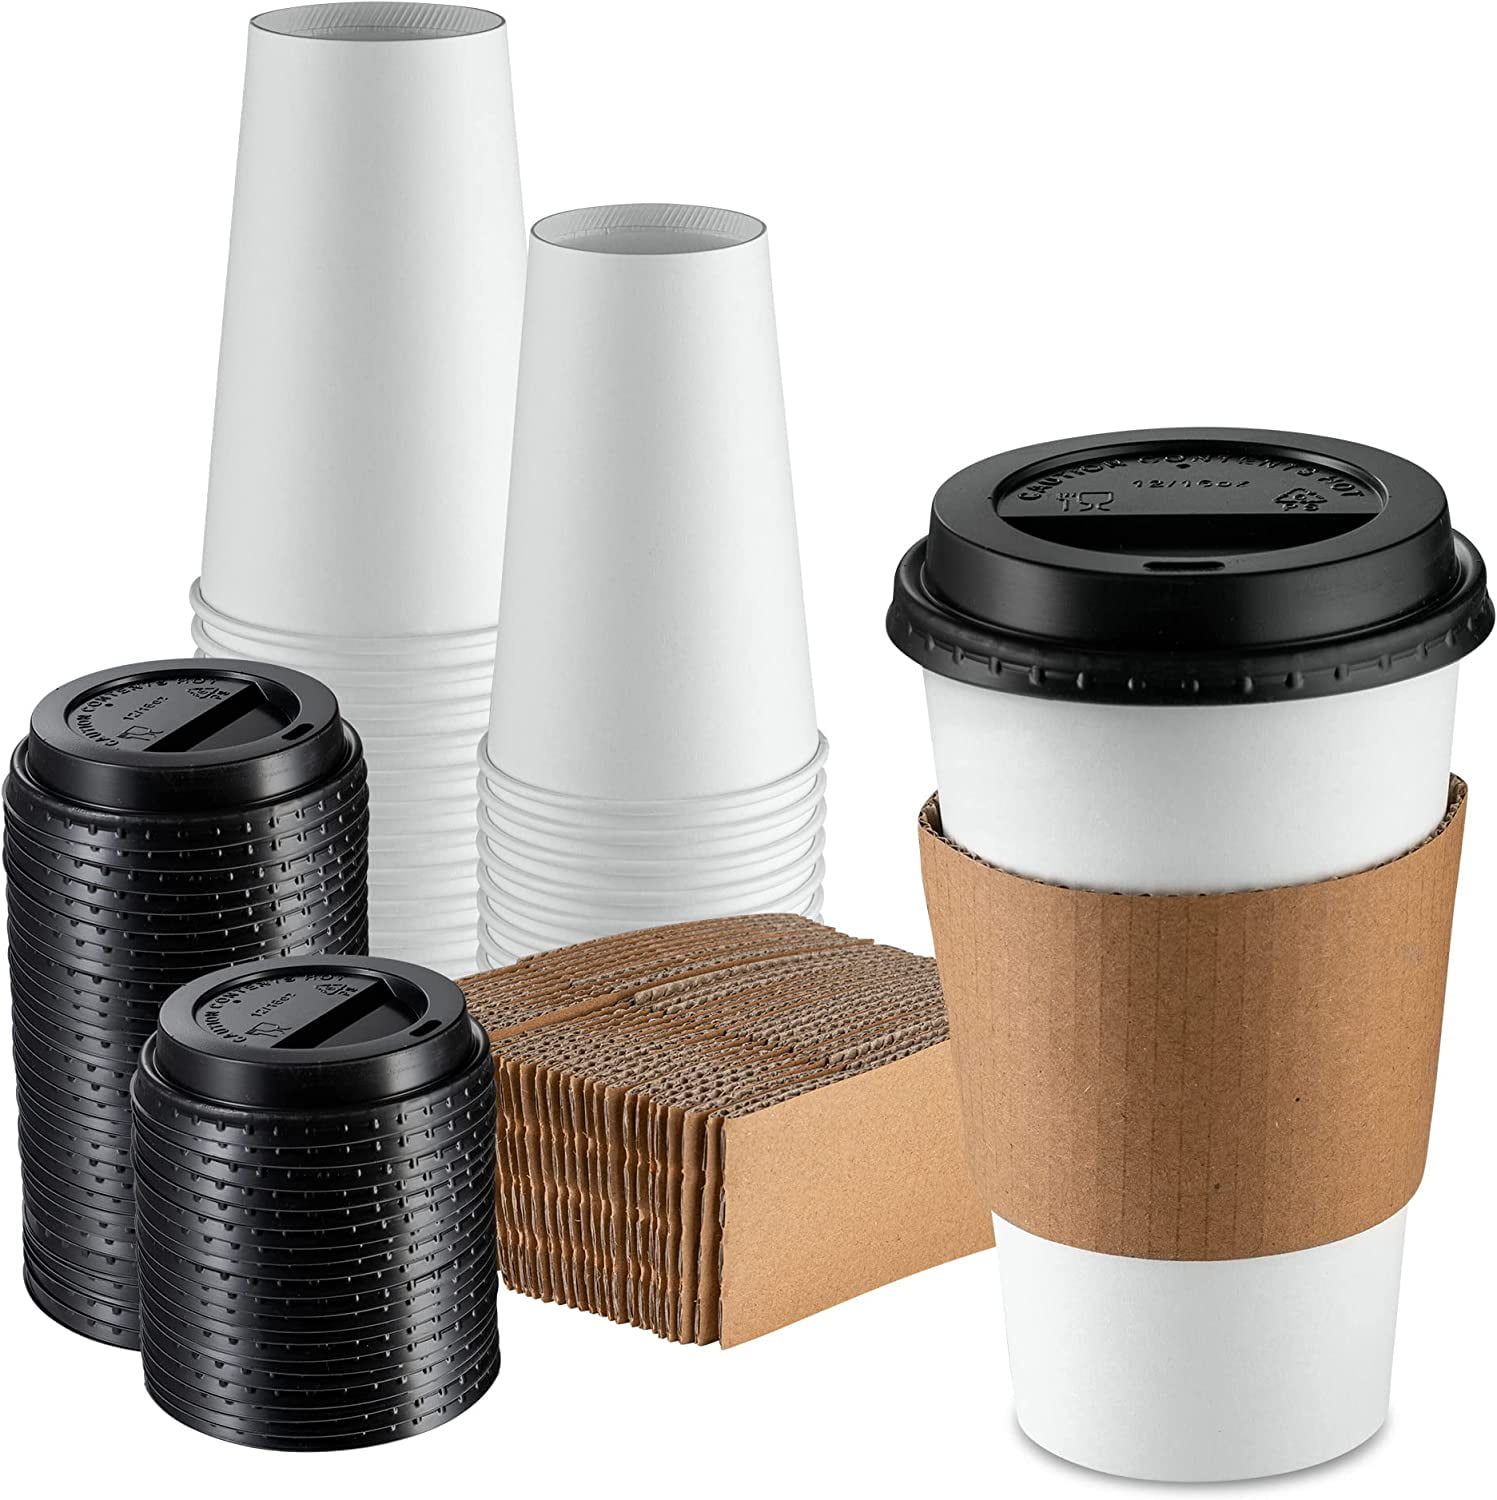 Sleeves ONLY: Restpresso Hot Coffee Sleeves with Handle, 1000 Disposable Cup Sleeves - Cups Sold Separately, Fits 12-, 16-, and 20-Ounce Cups, Nude PA